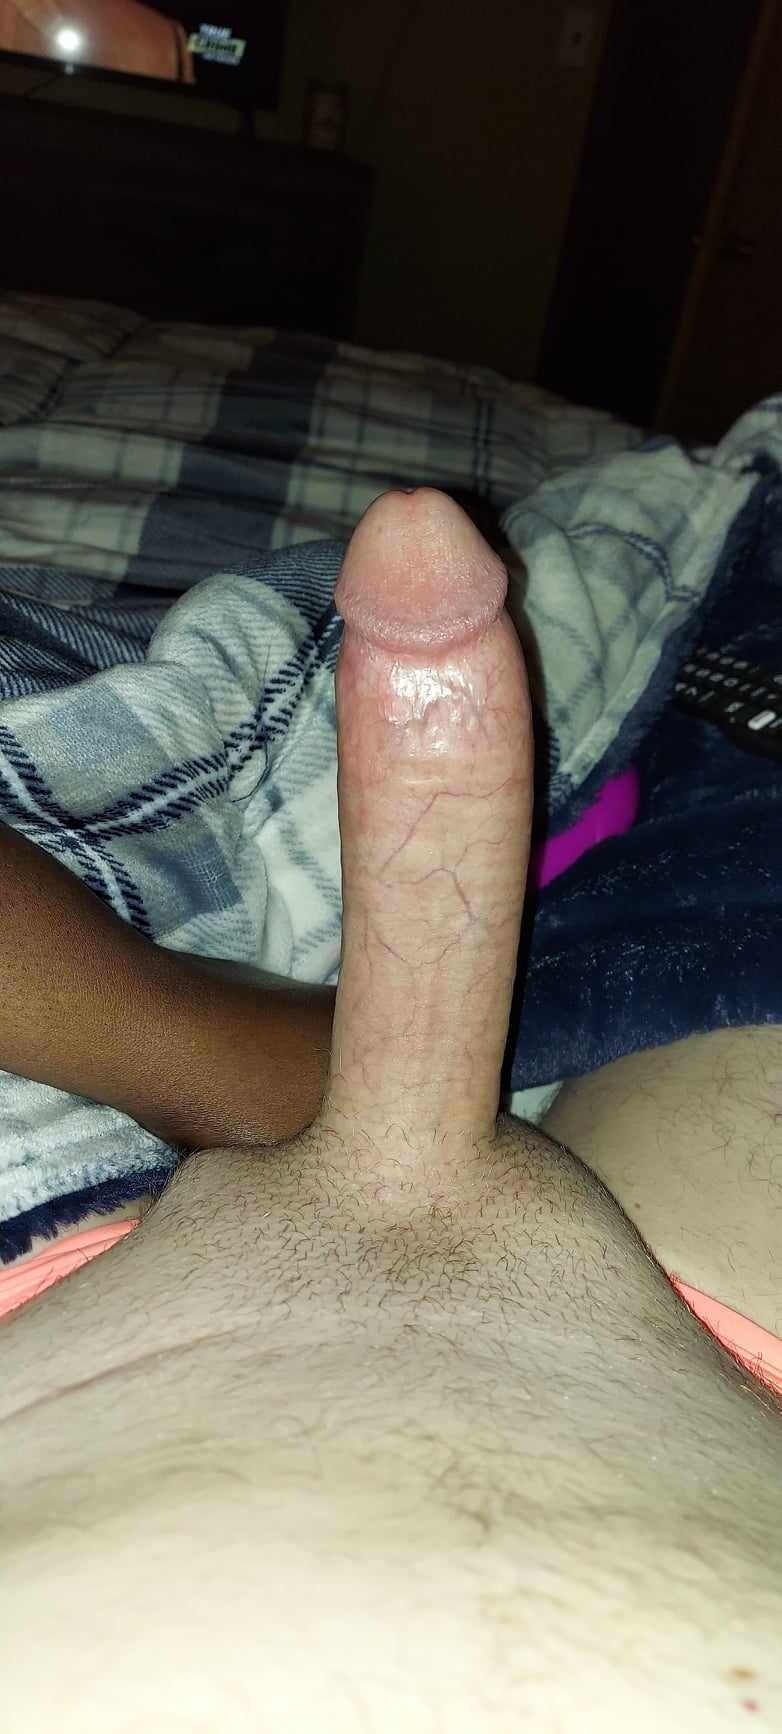 MY COCK #2